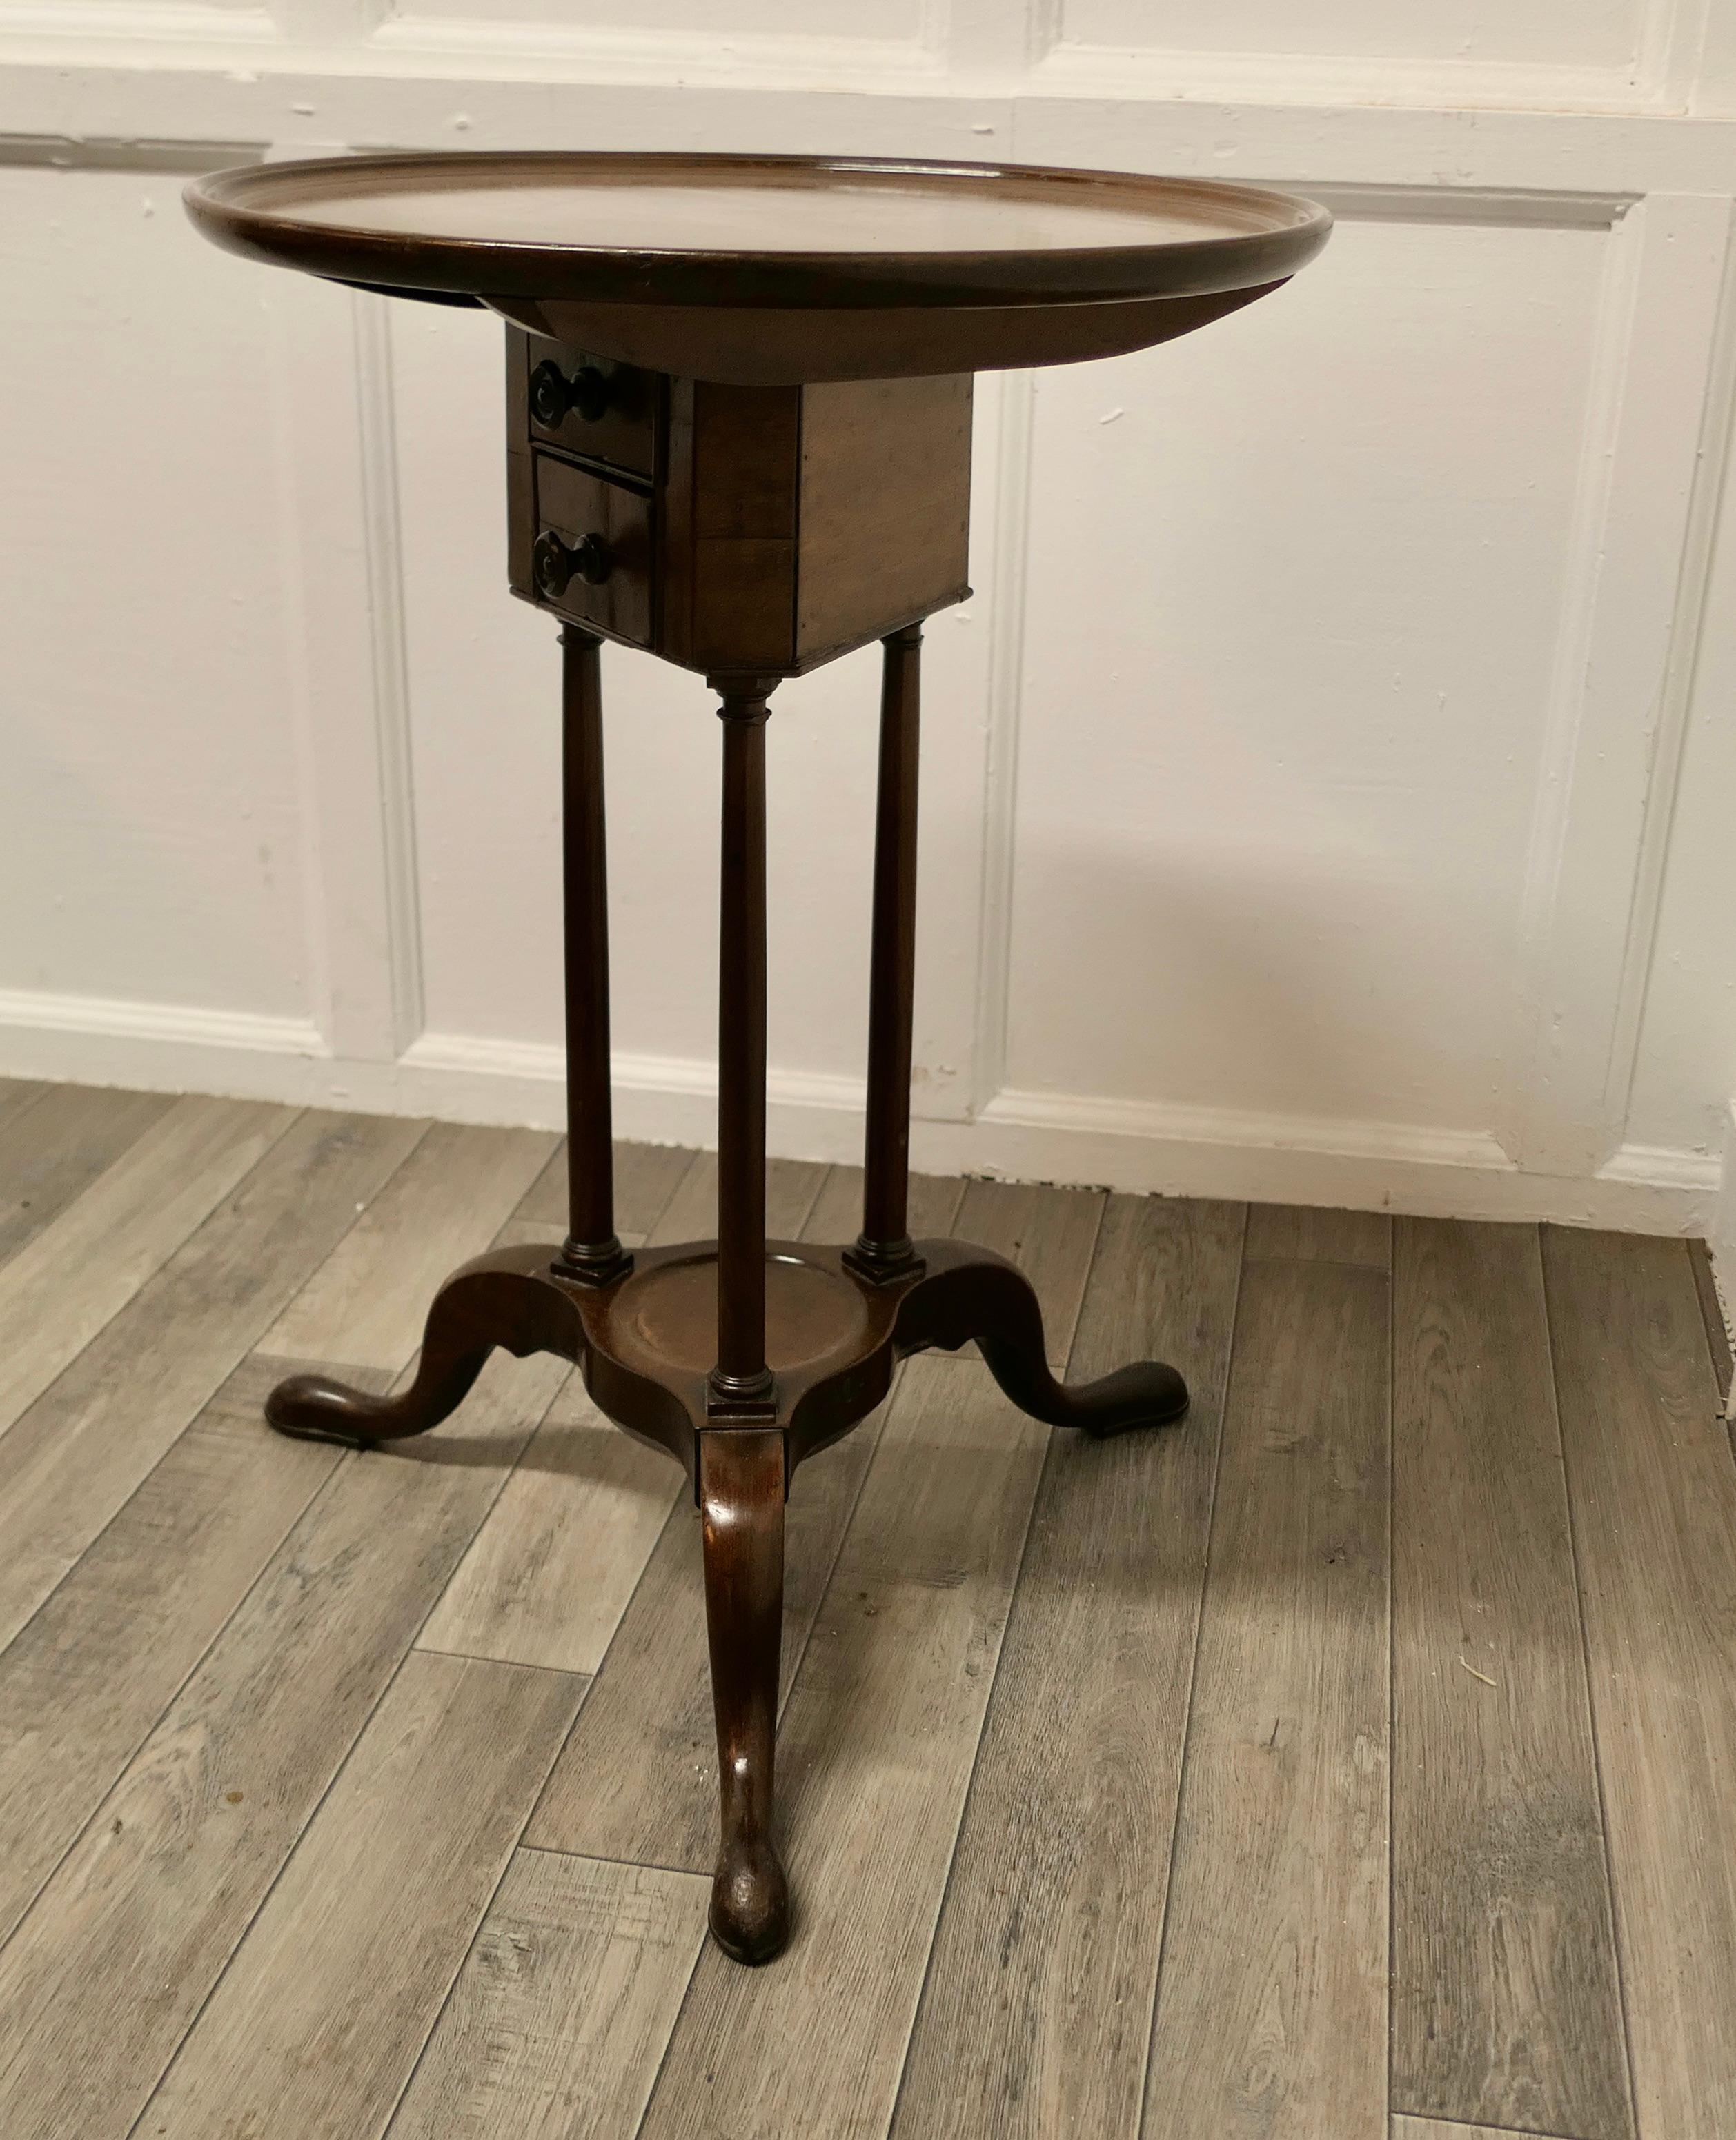 Tilt top wine table with drawers under

This lovely table stands on a three legged base with a small undertier, at the top there are 2 small drawers that can be accessed best when the table is tipped up

The circular top has a raised edge which